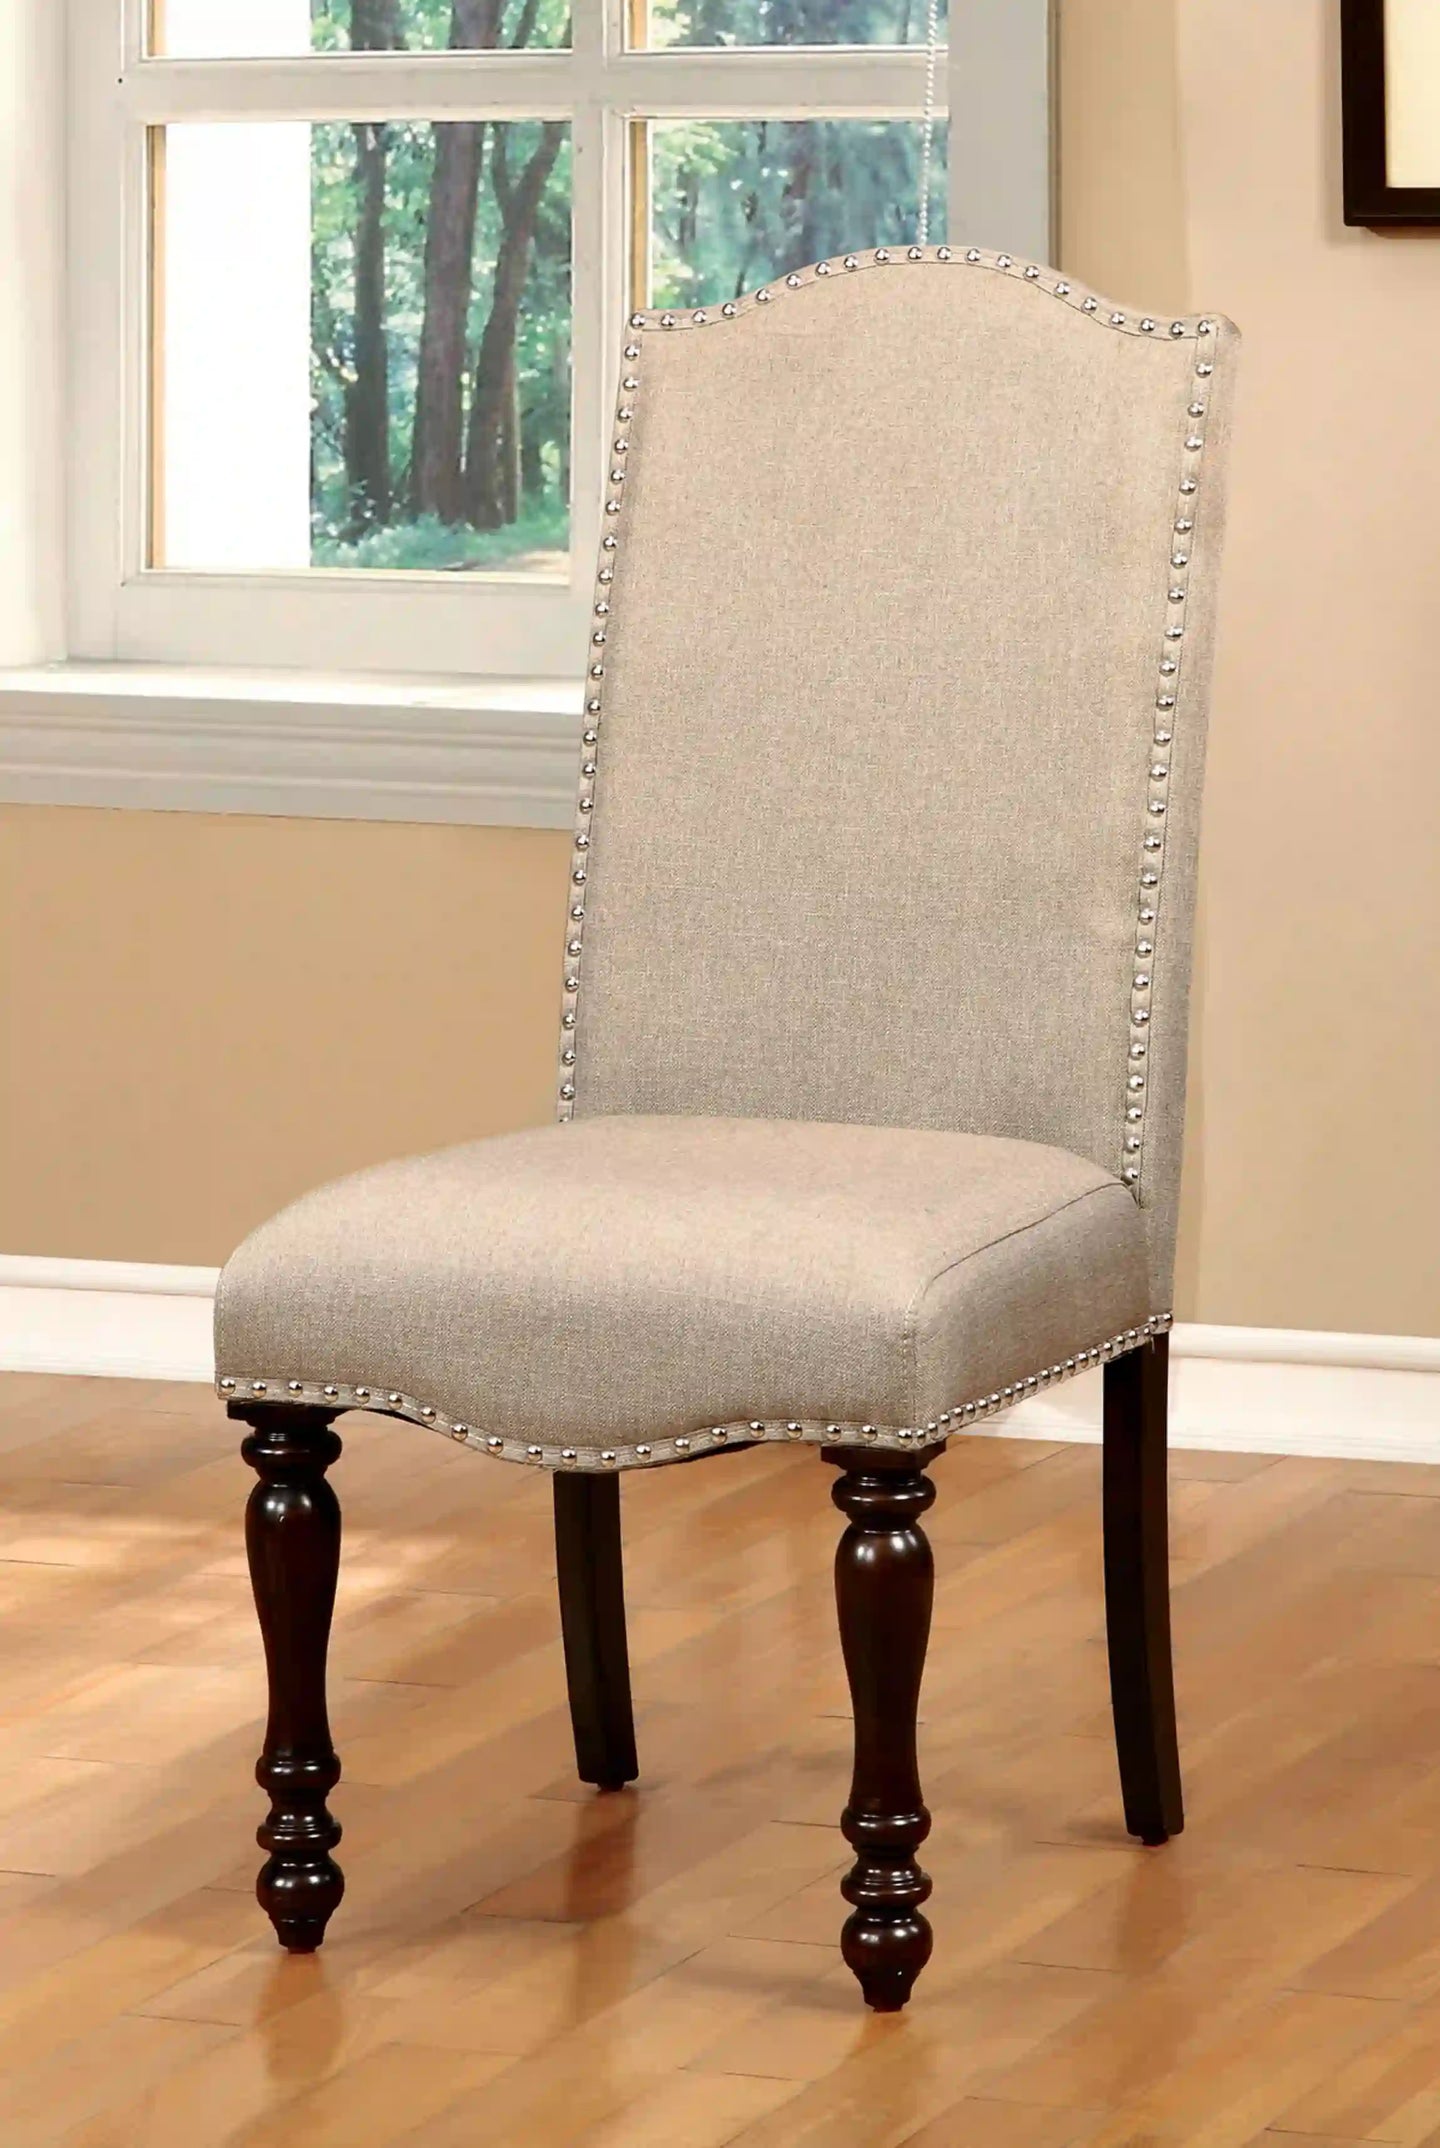 Furniture of America Roselyn Cottage Nailhead Trim Side Chairs (Set of 2) - IDF-3133SC